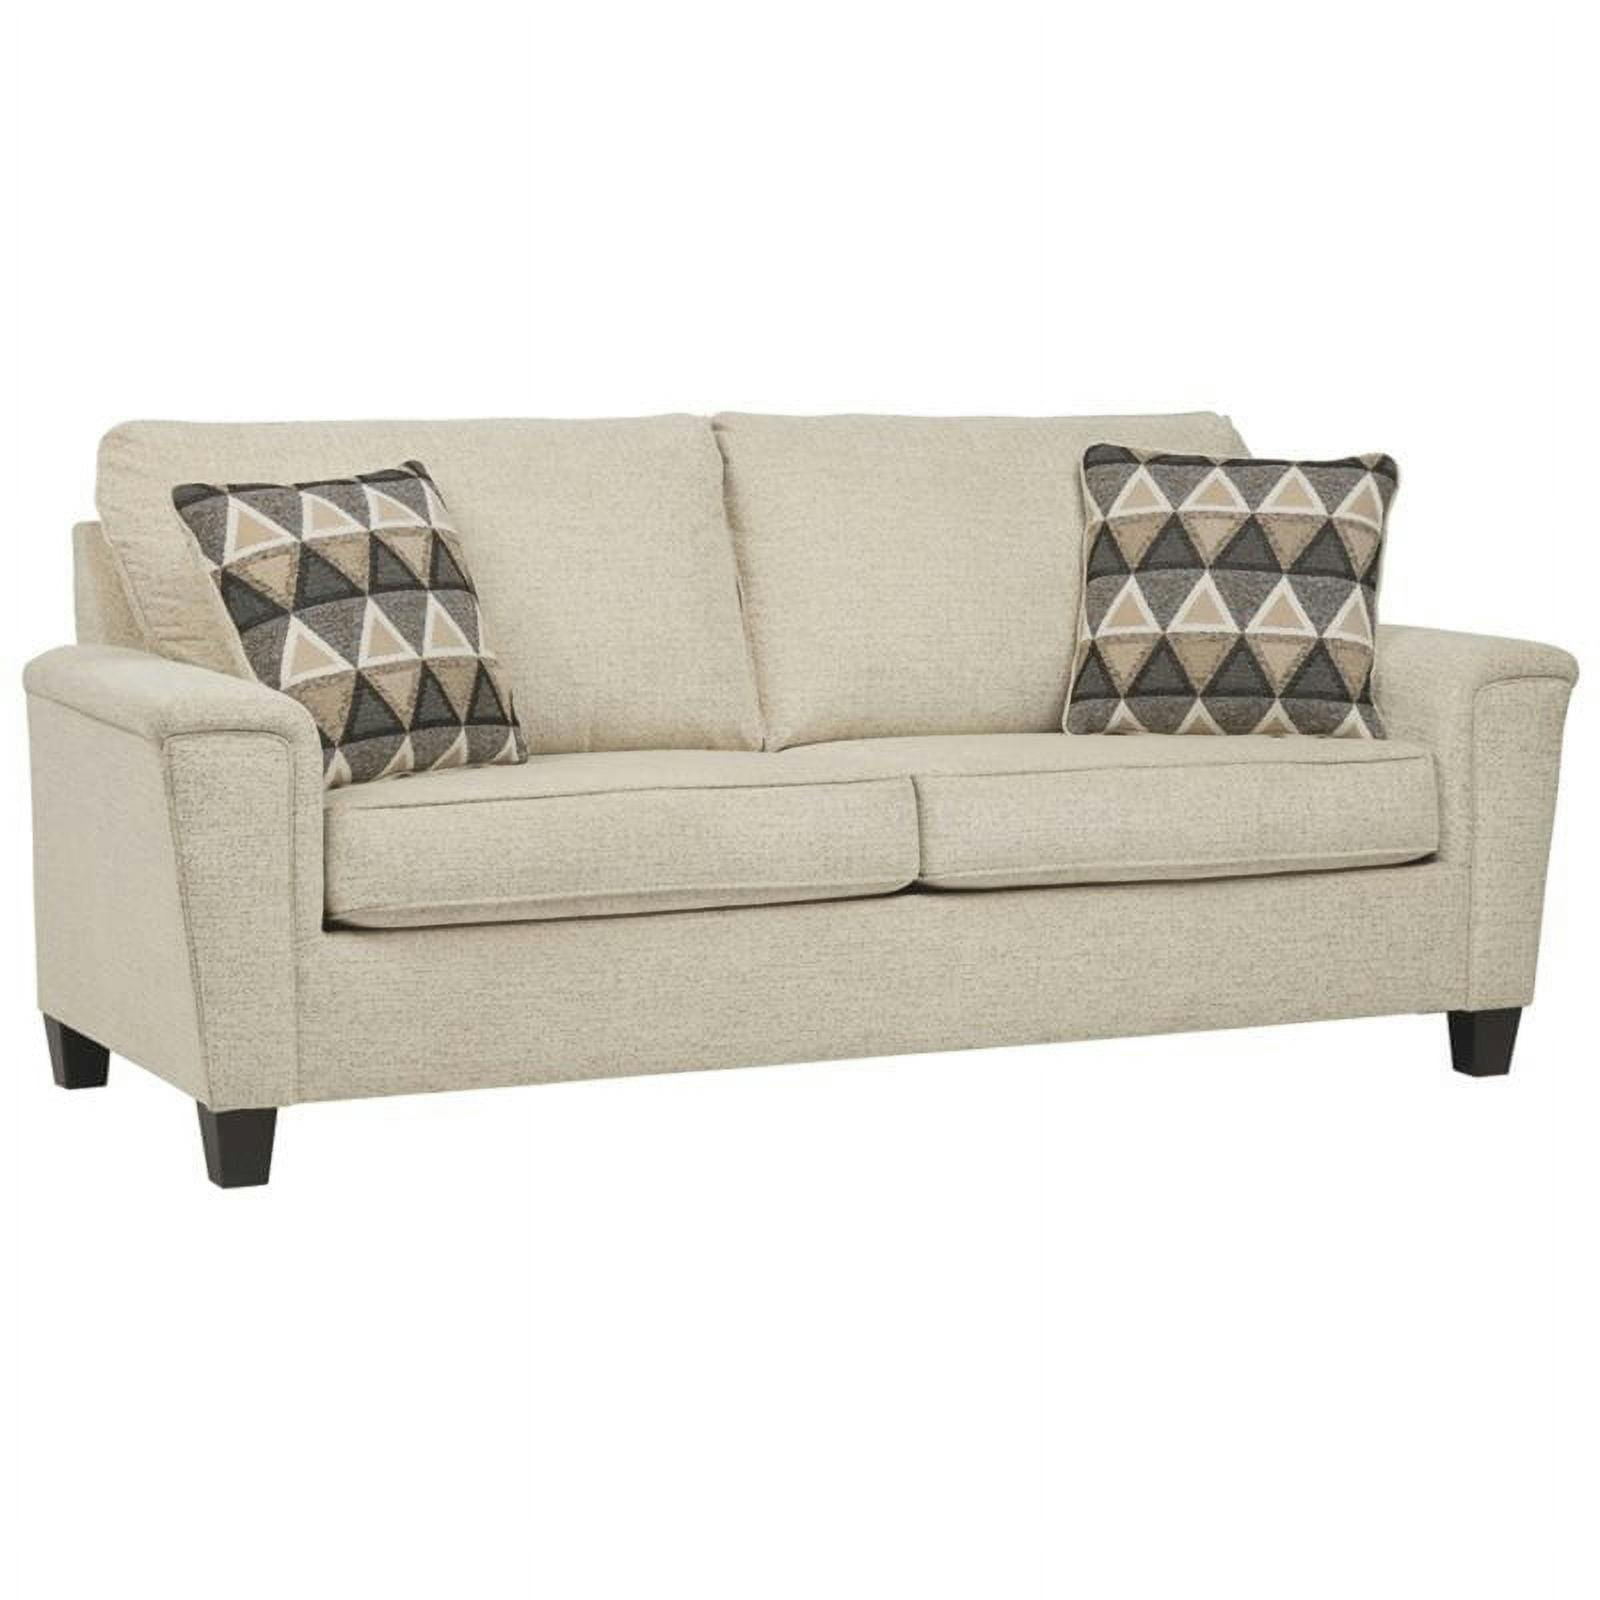 Modern Beige Fabric Sofa with Removable Cushions and Track Arm, 89"